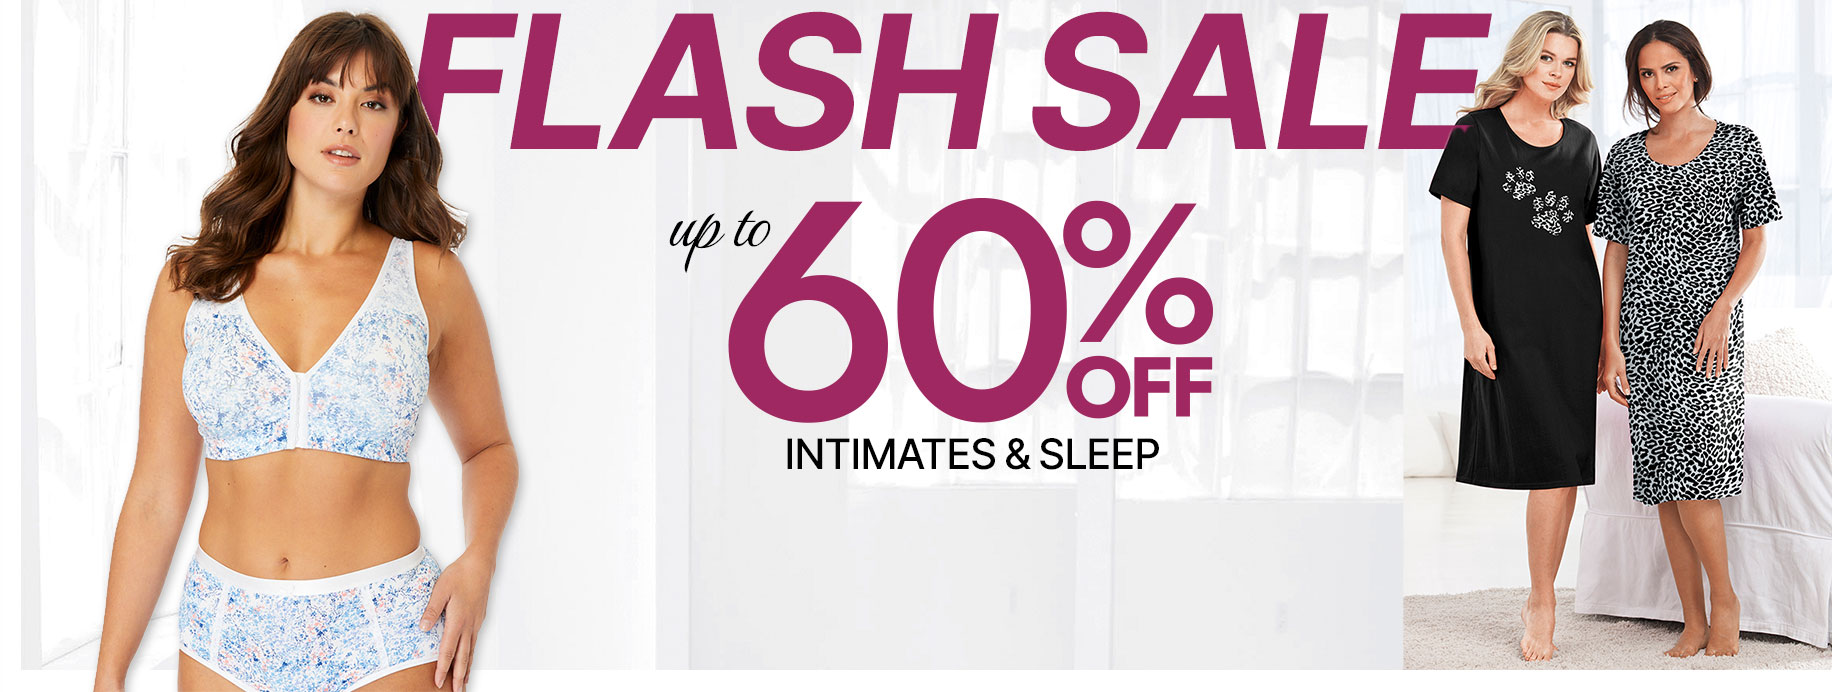 Flash Sale up to 60% off Intimates and Sleepwear.